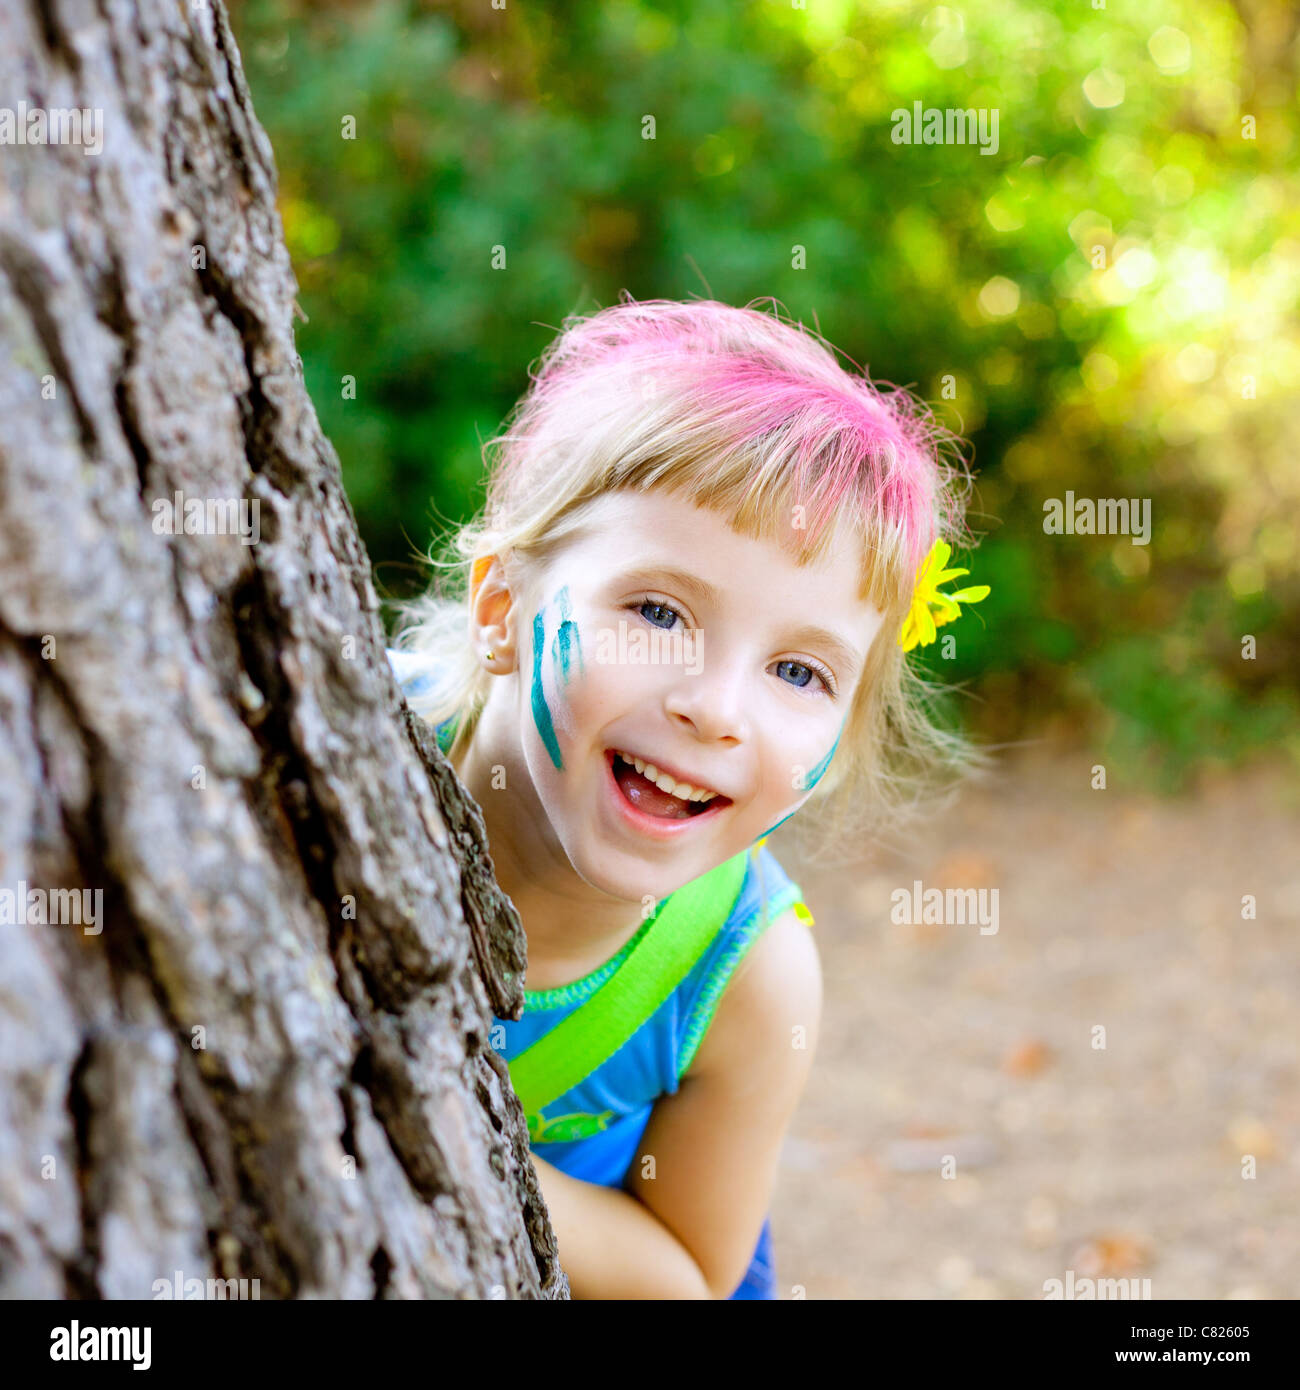 children little girl happy playing in forest tree with party makeup Stock Photo